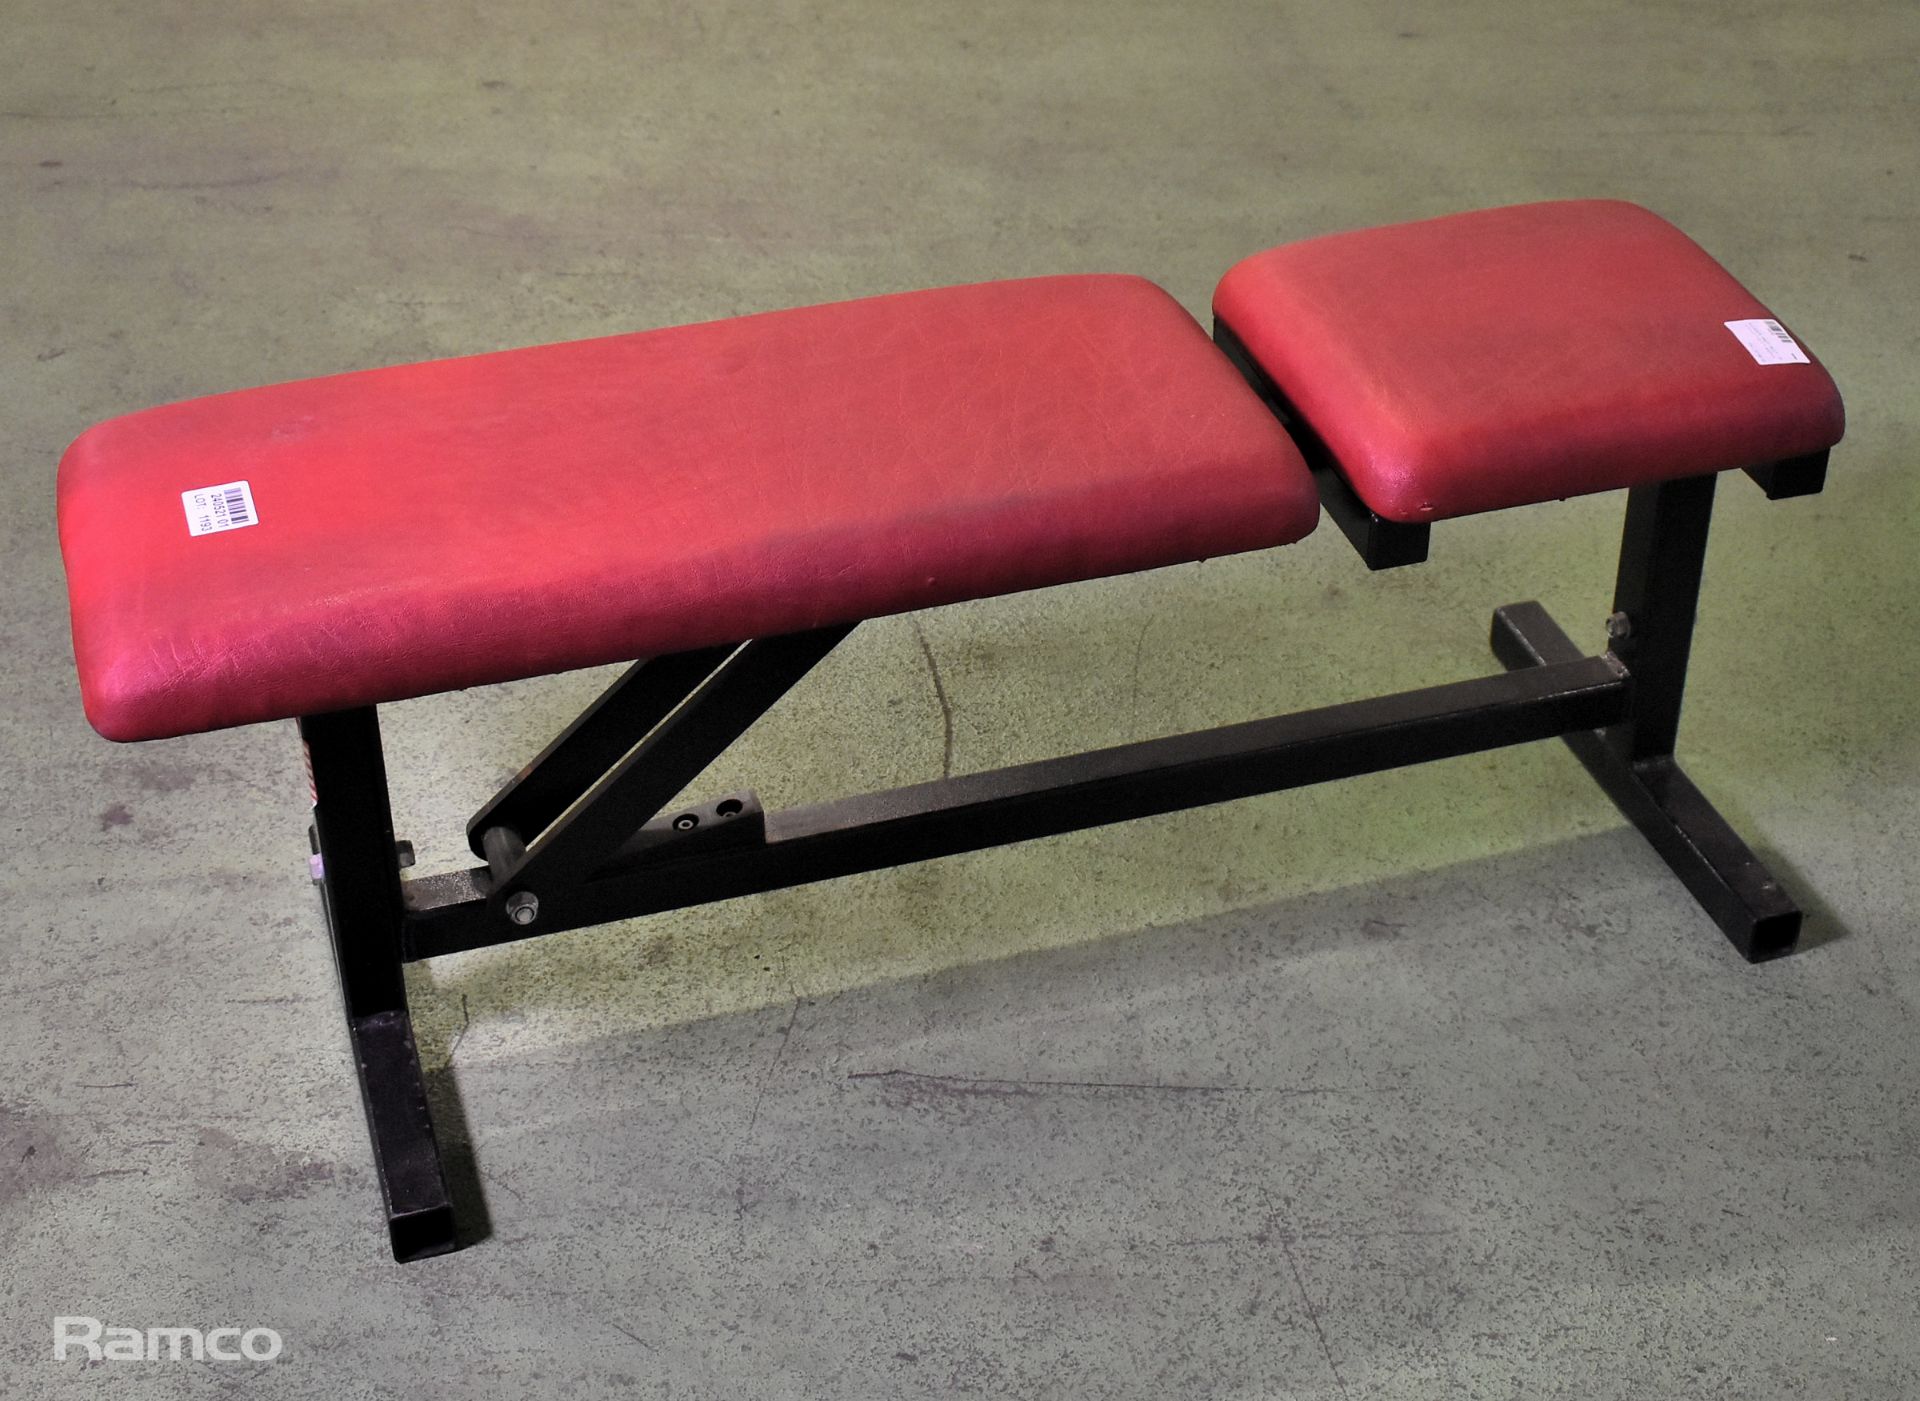 Adjustable weight bench - W 410 x D 1100 x H 430mm